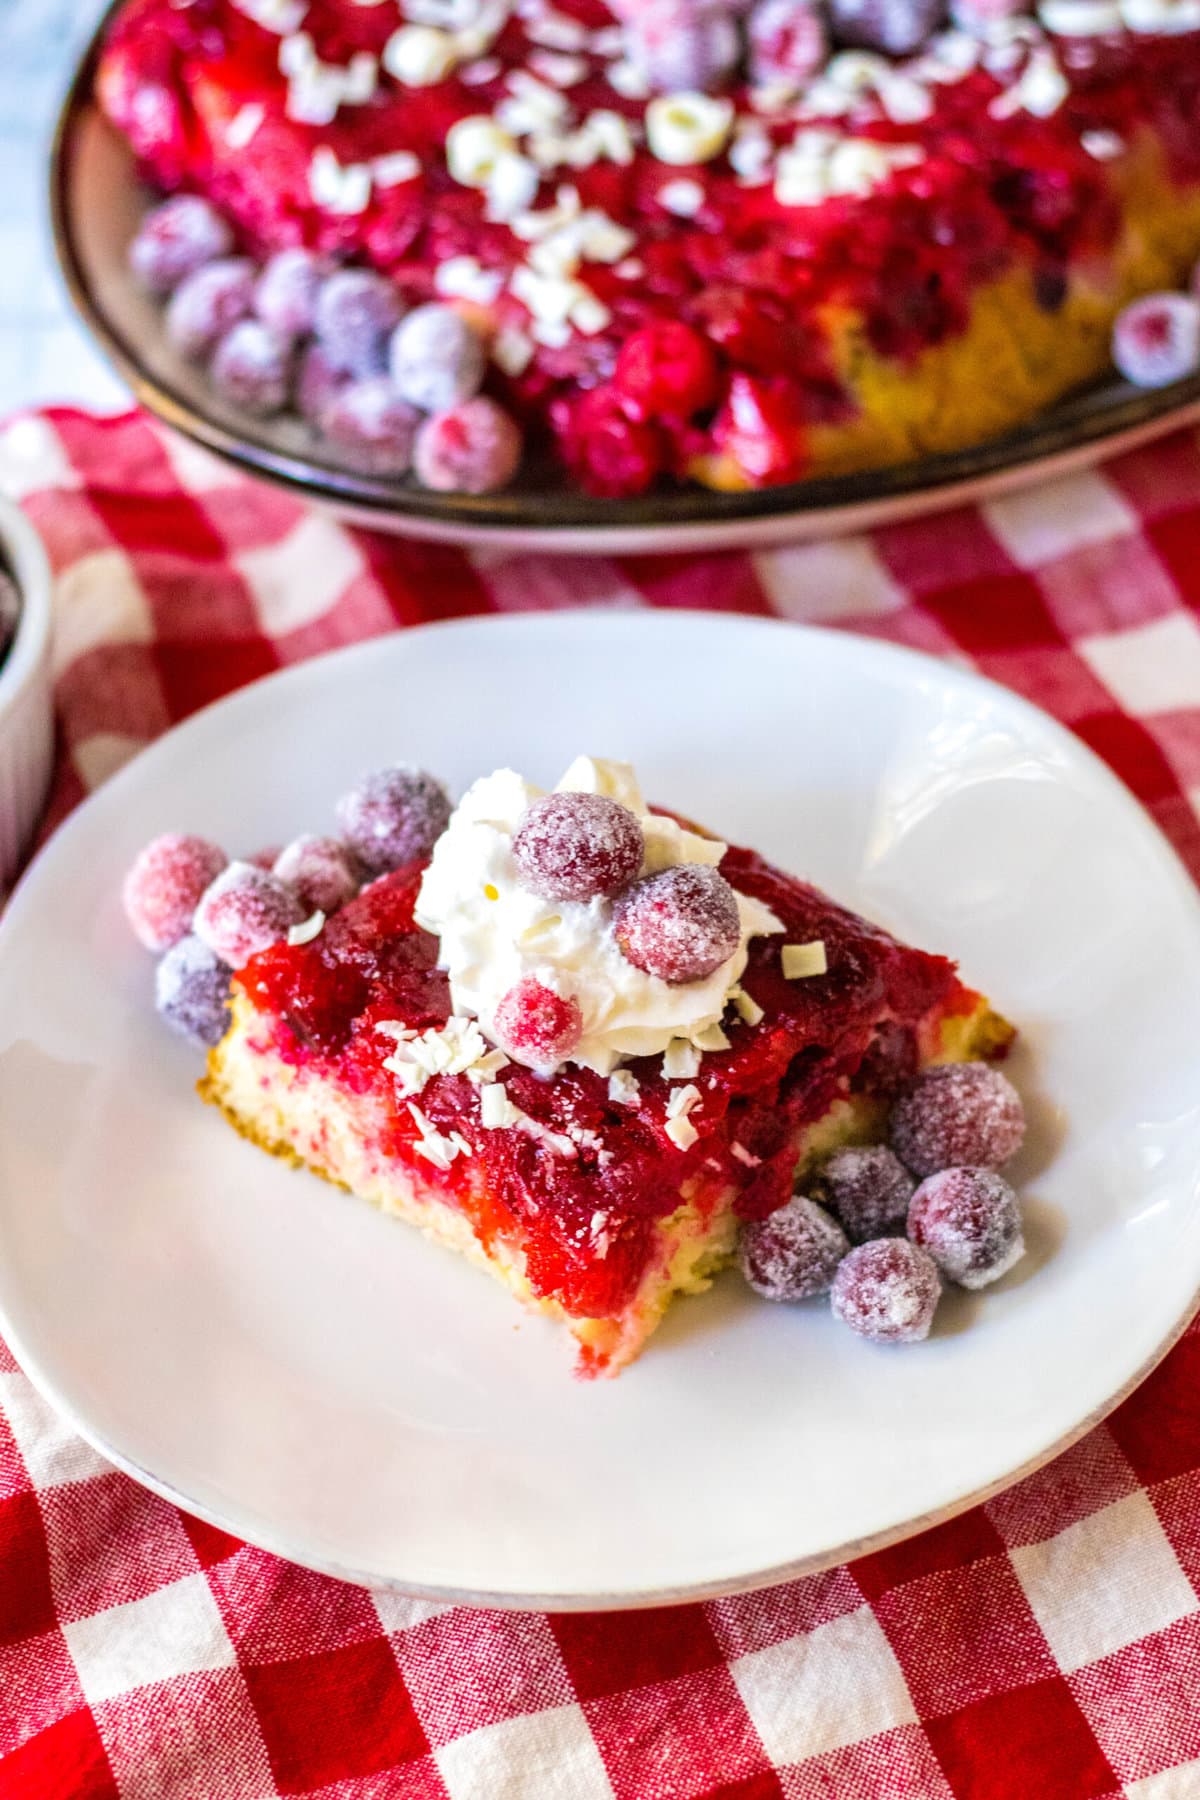 A slice of the Cranberry Upside-Down Cake.